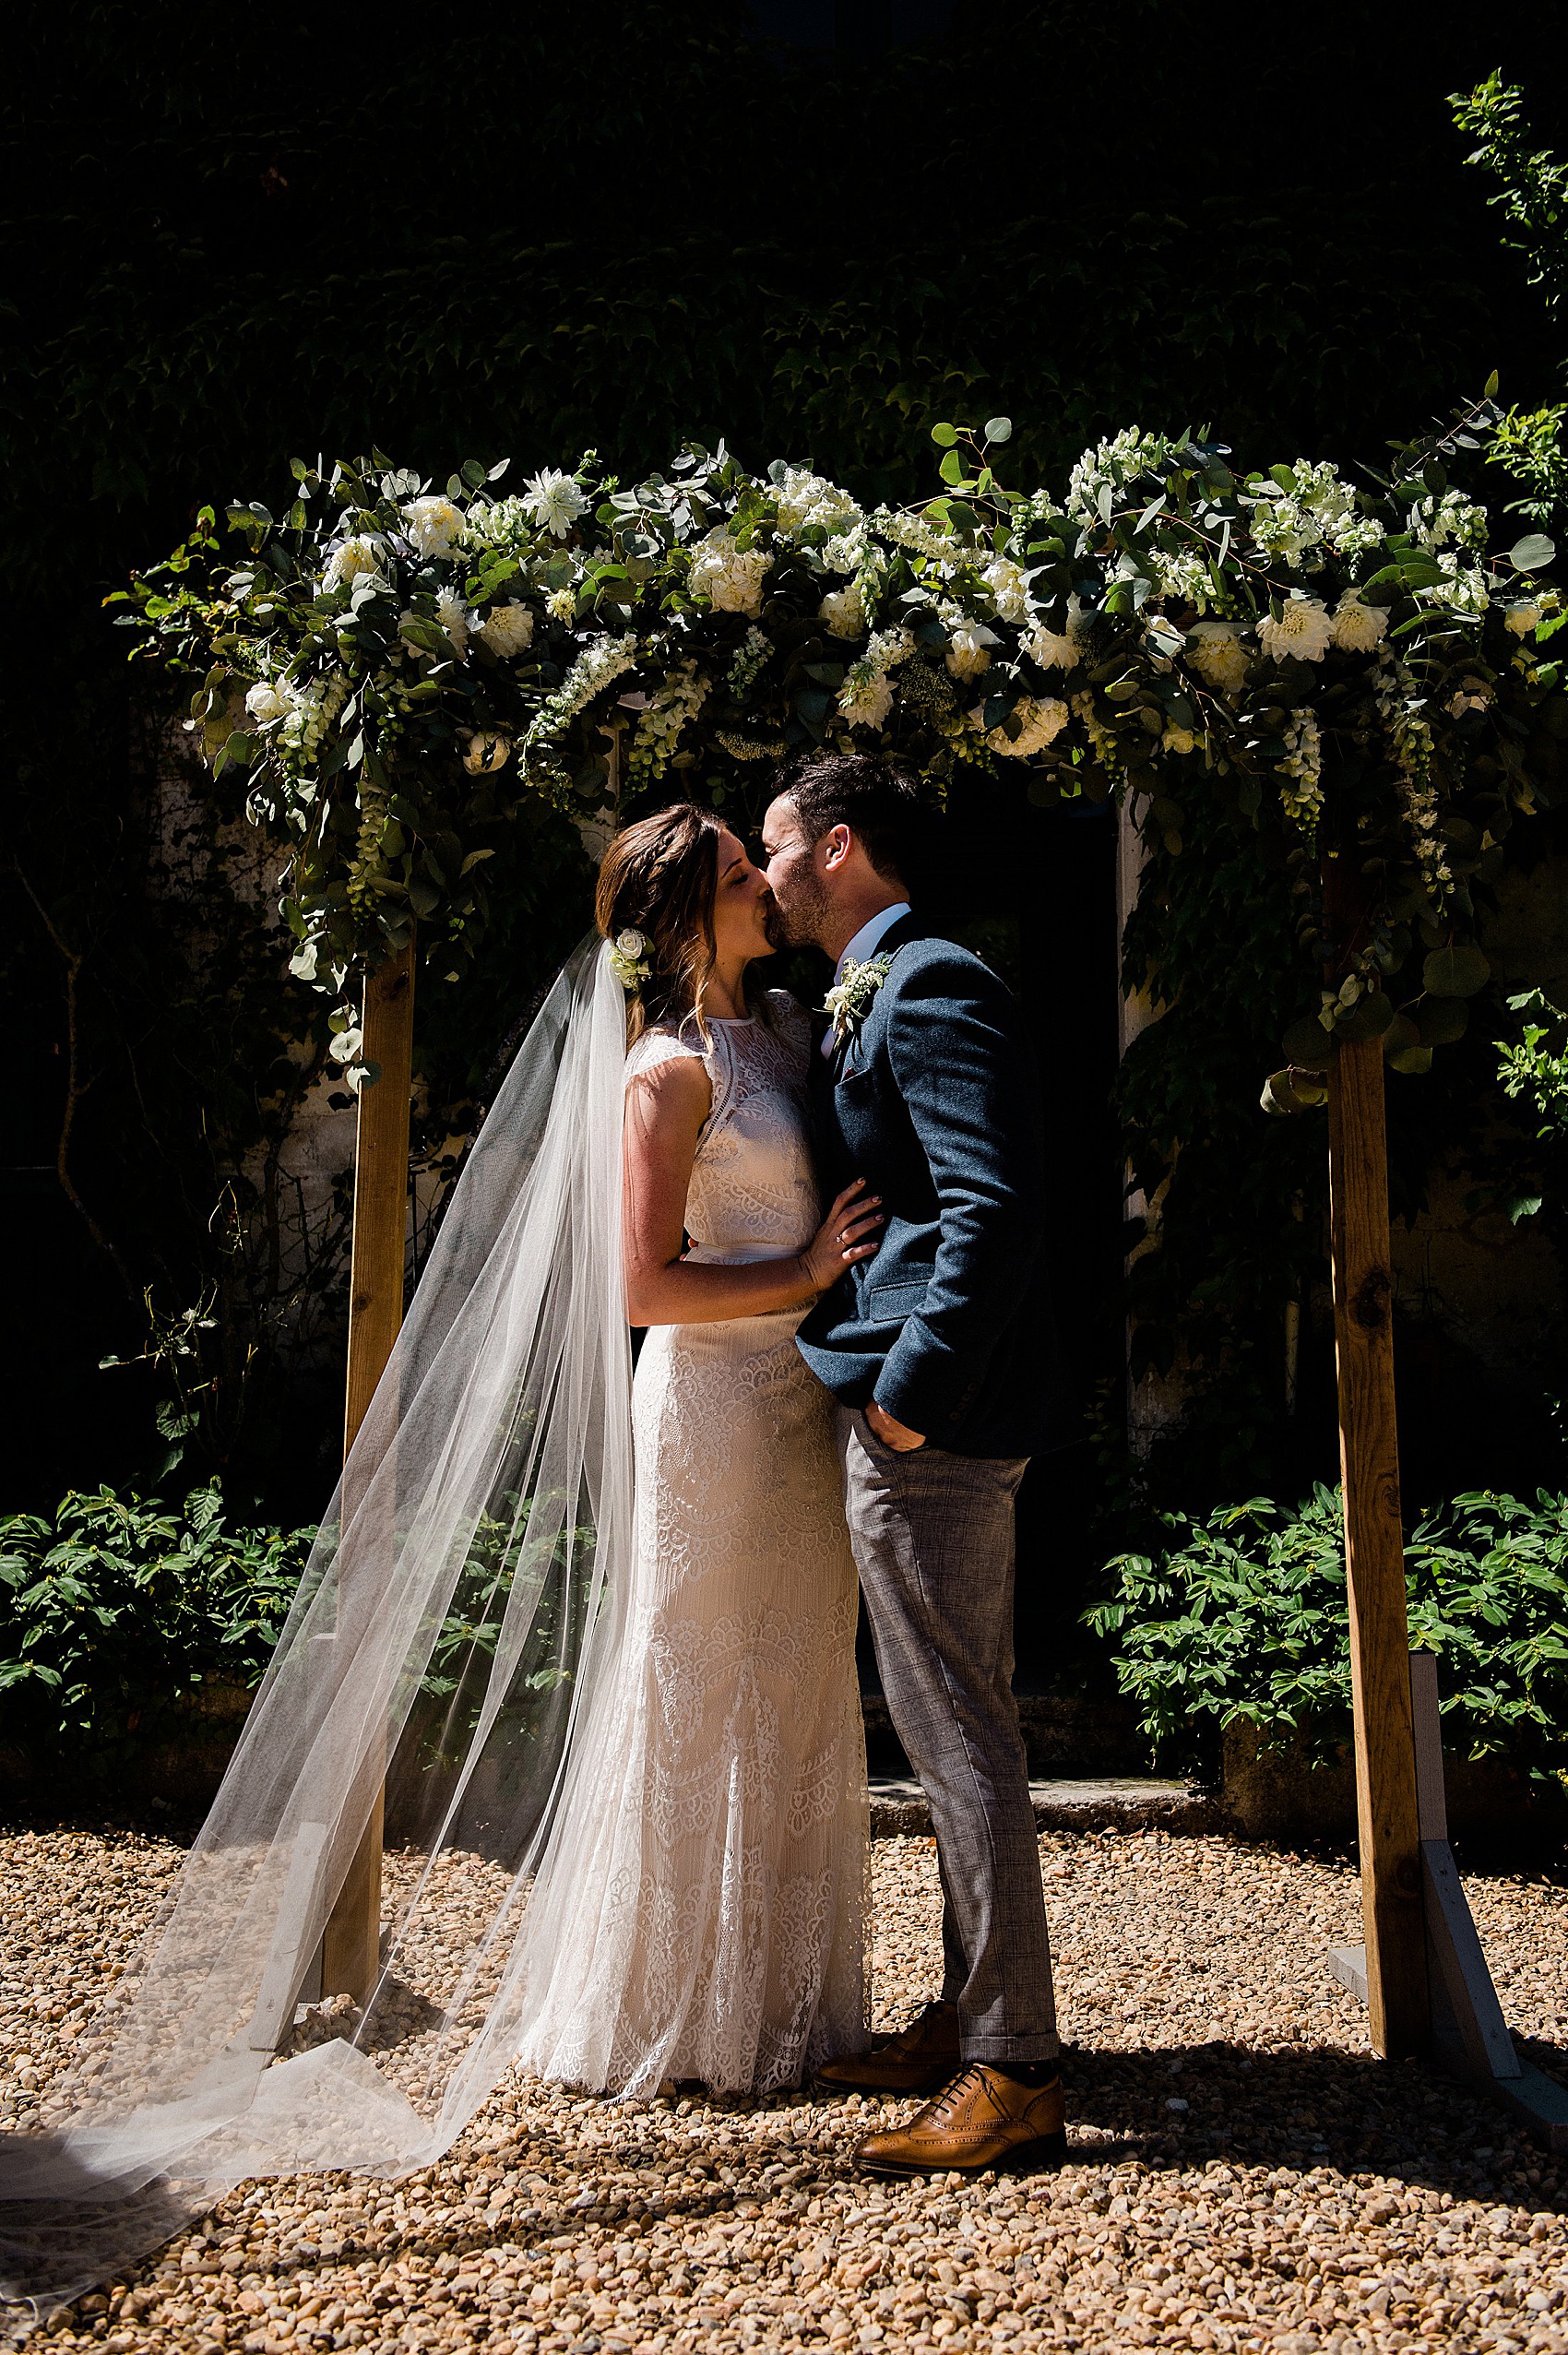 A Natural Organic Wedding In France With A Bride In Catherine Deane